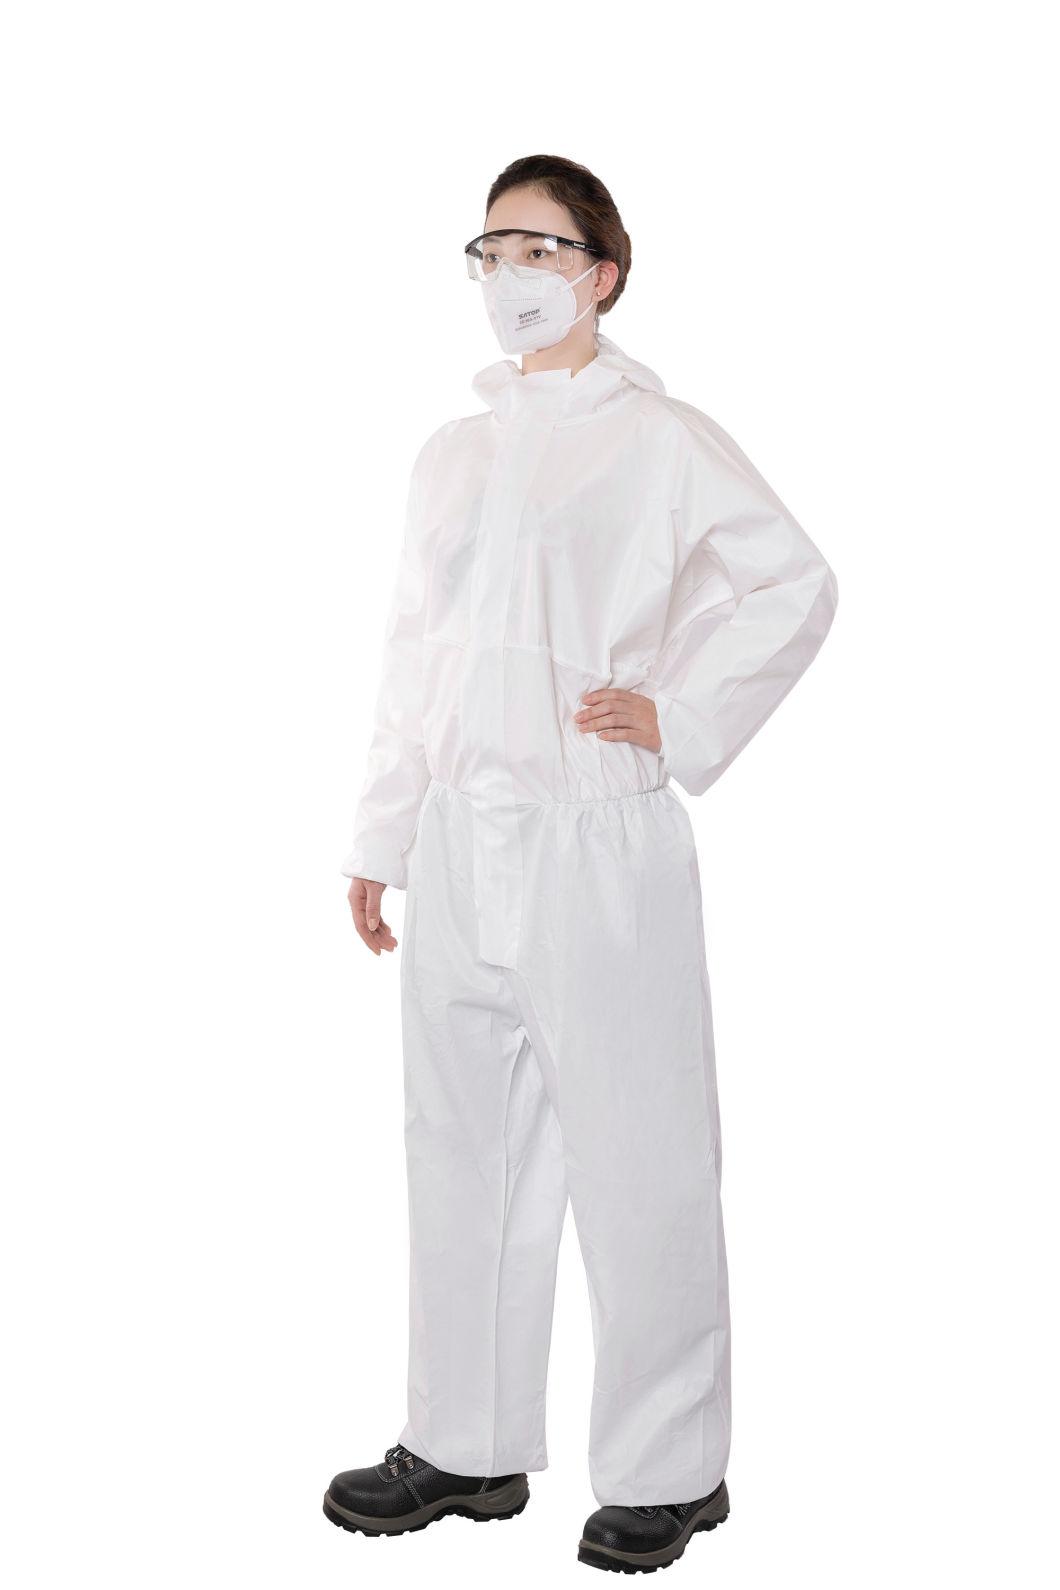 Protective Light Weight Disposable SMS Protective Safety Coverall Suits Protection Clothing